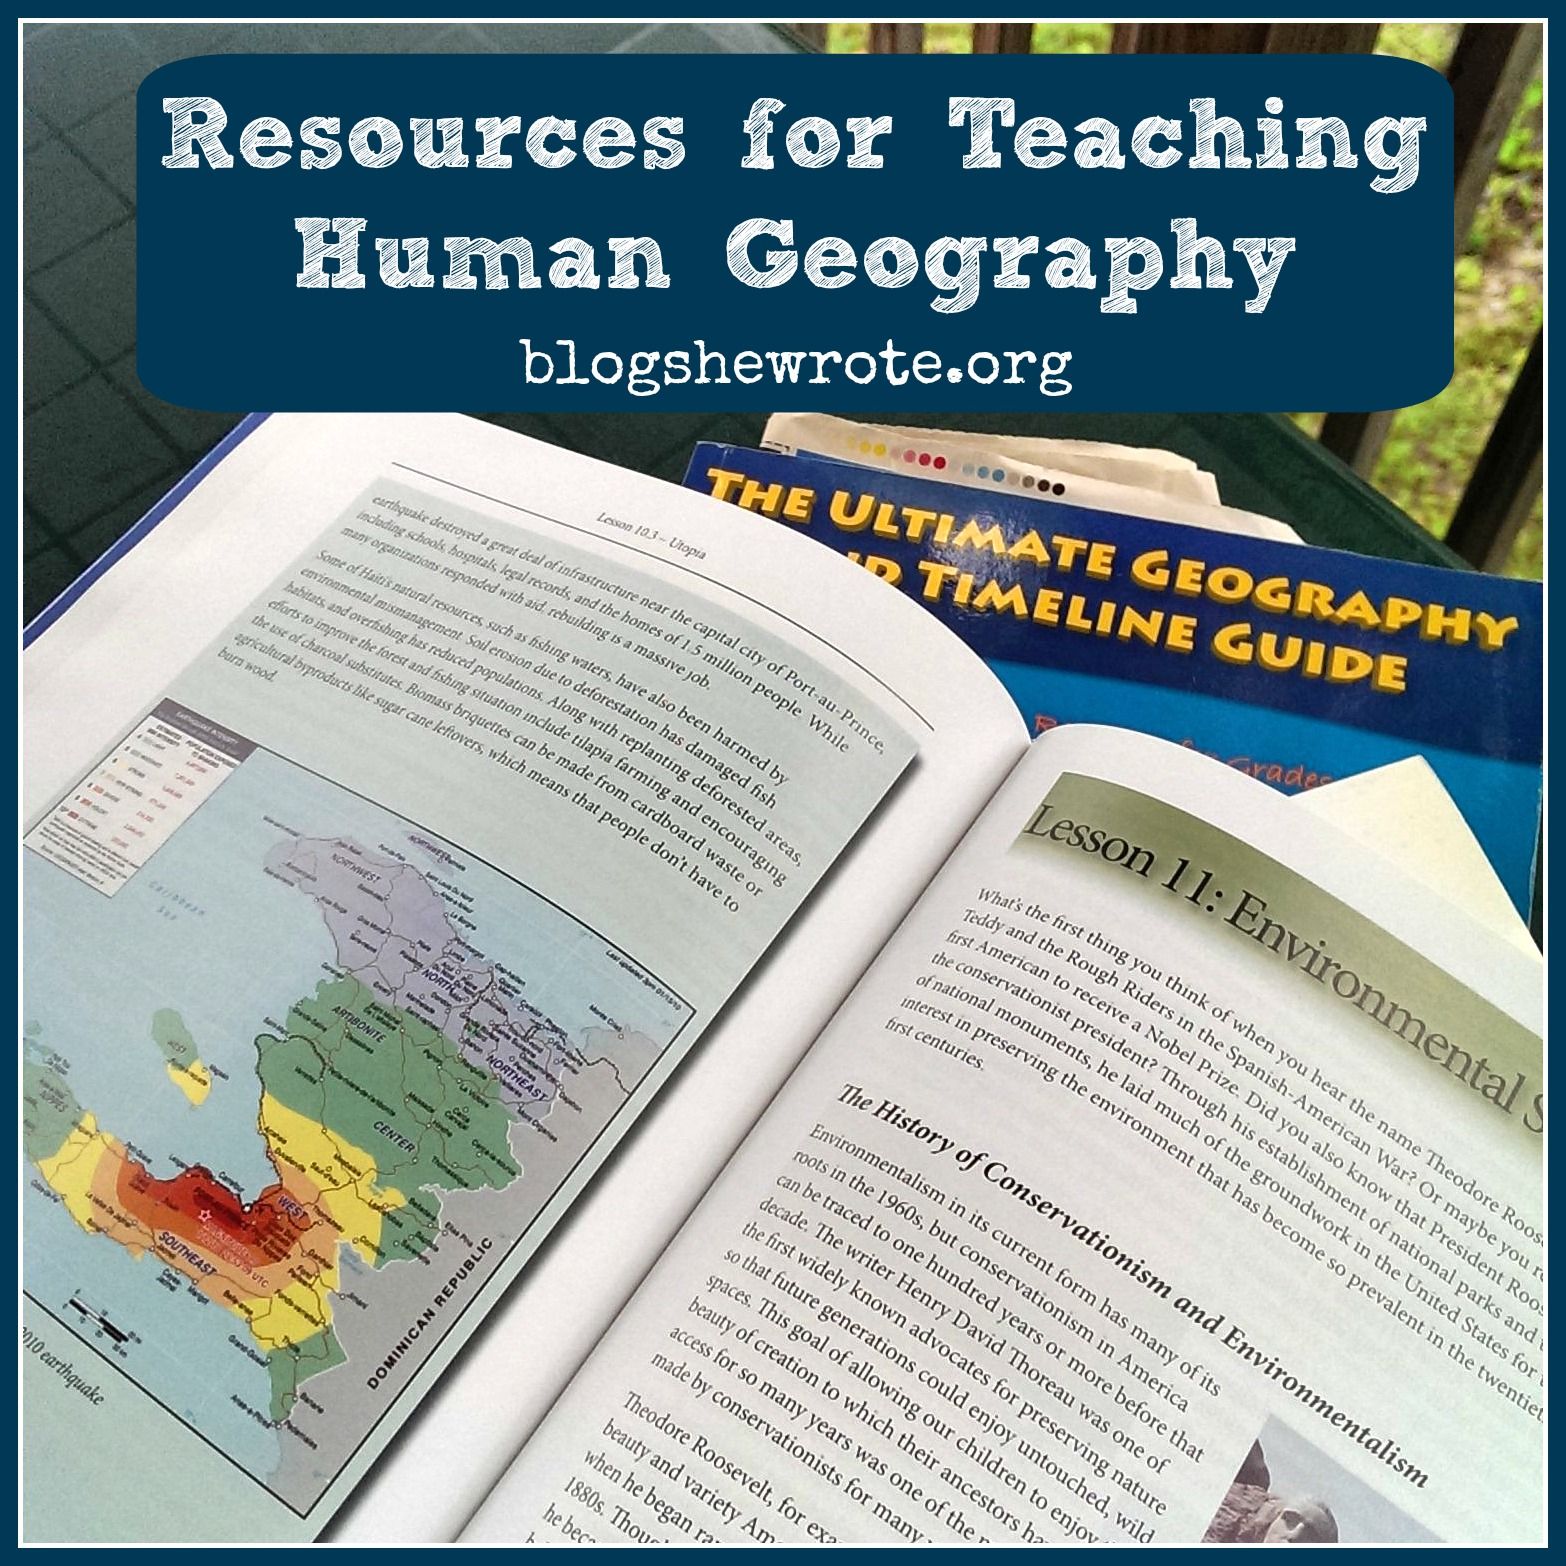 Resources for Teaching Human Geography